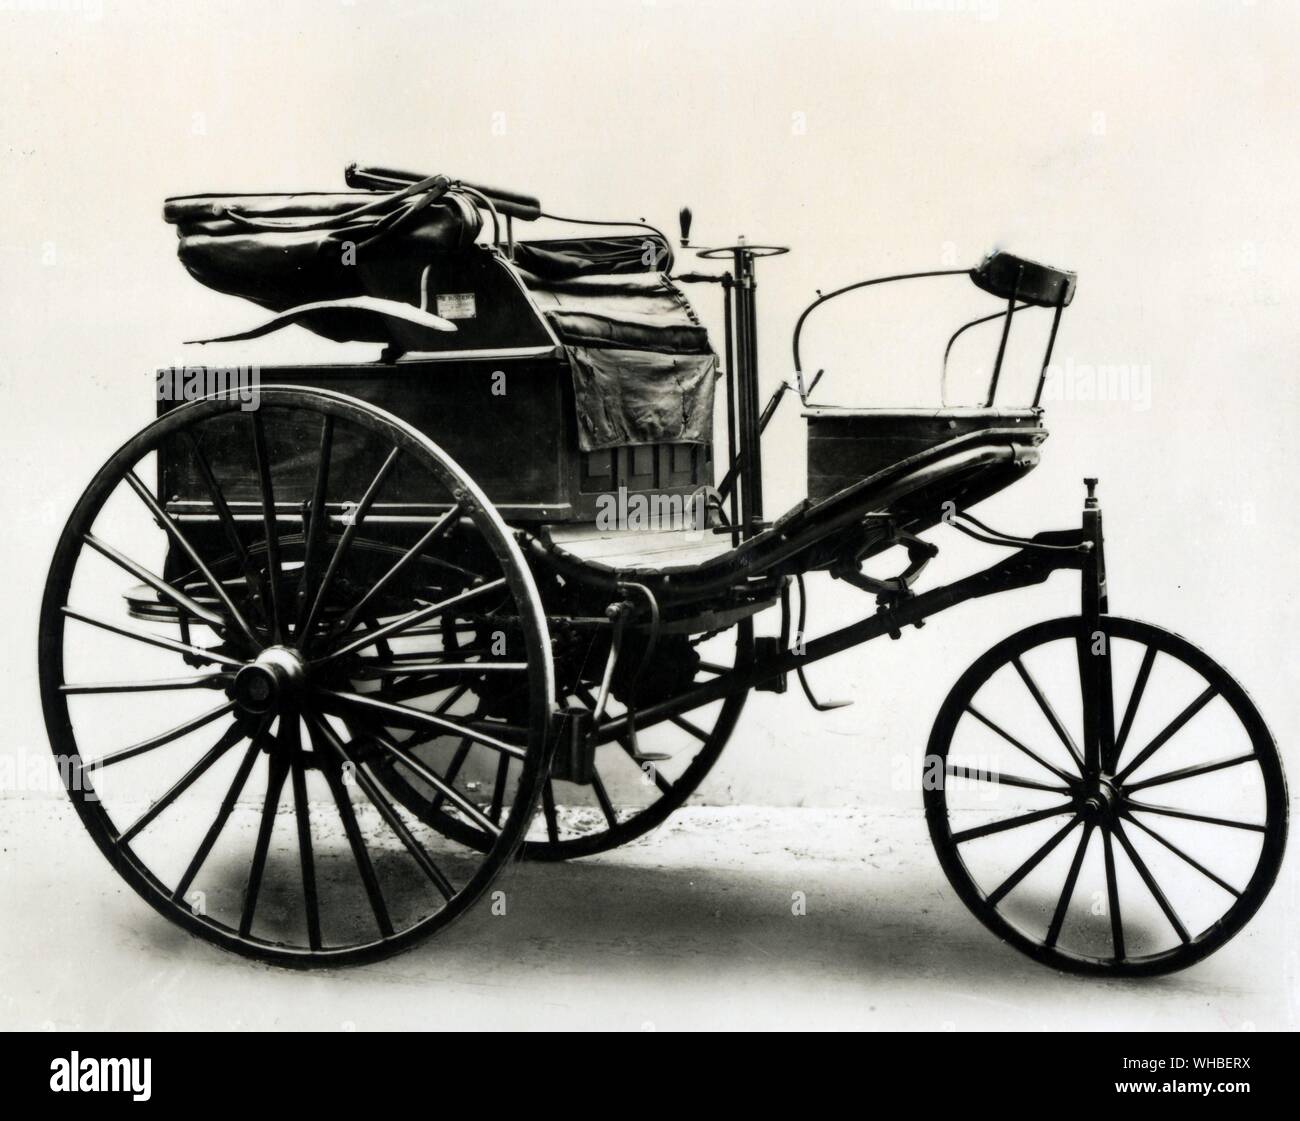 Benz motor car 1888 - a three-wheeled vehicle with a horizontal single cylinder motor designed by Carl Benz. This example is probably the first petrol car brought into England. Stock Photo